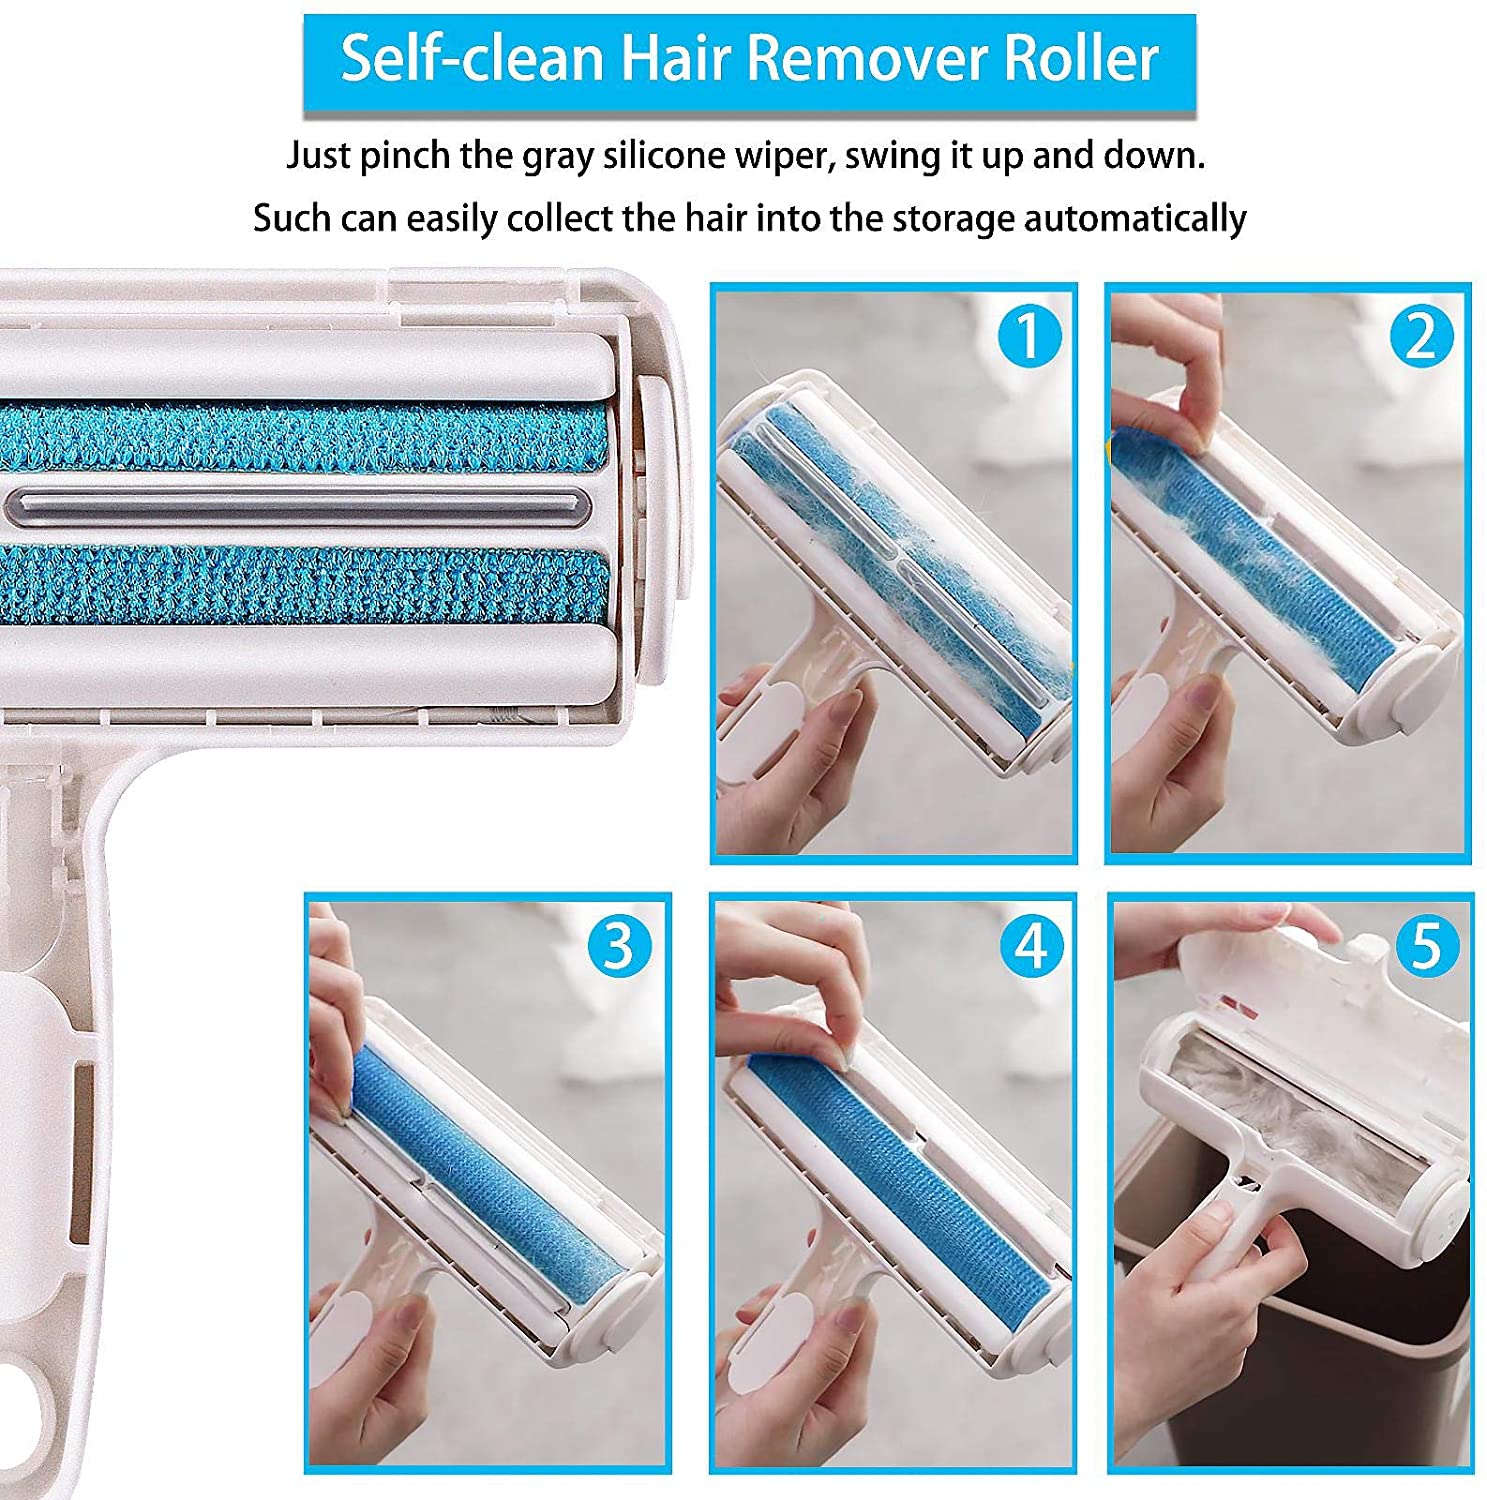 Cat hair remover roller